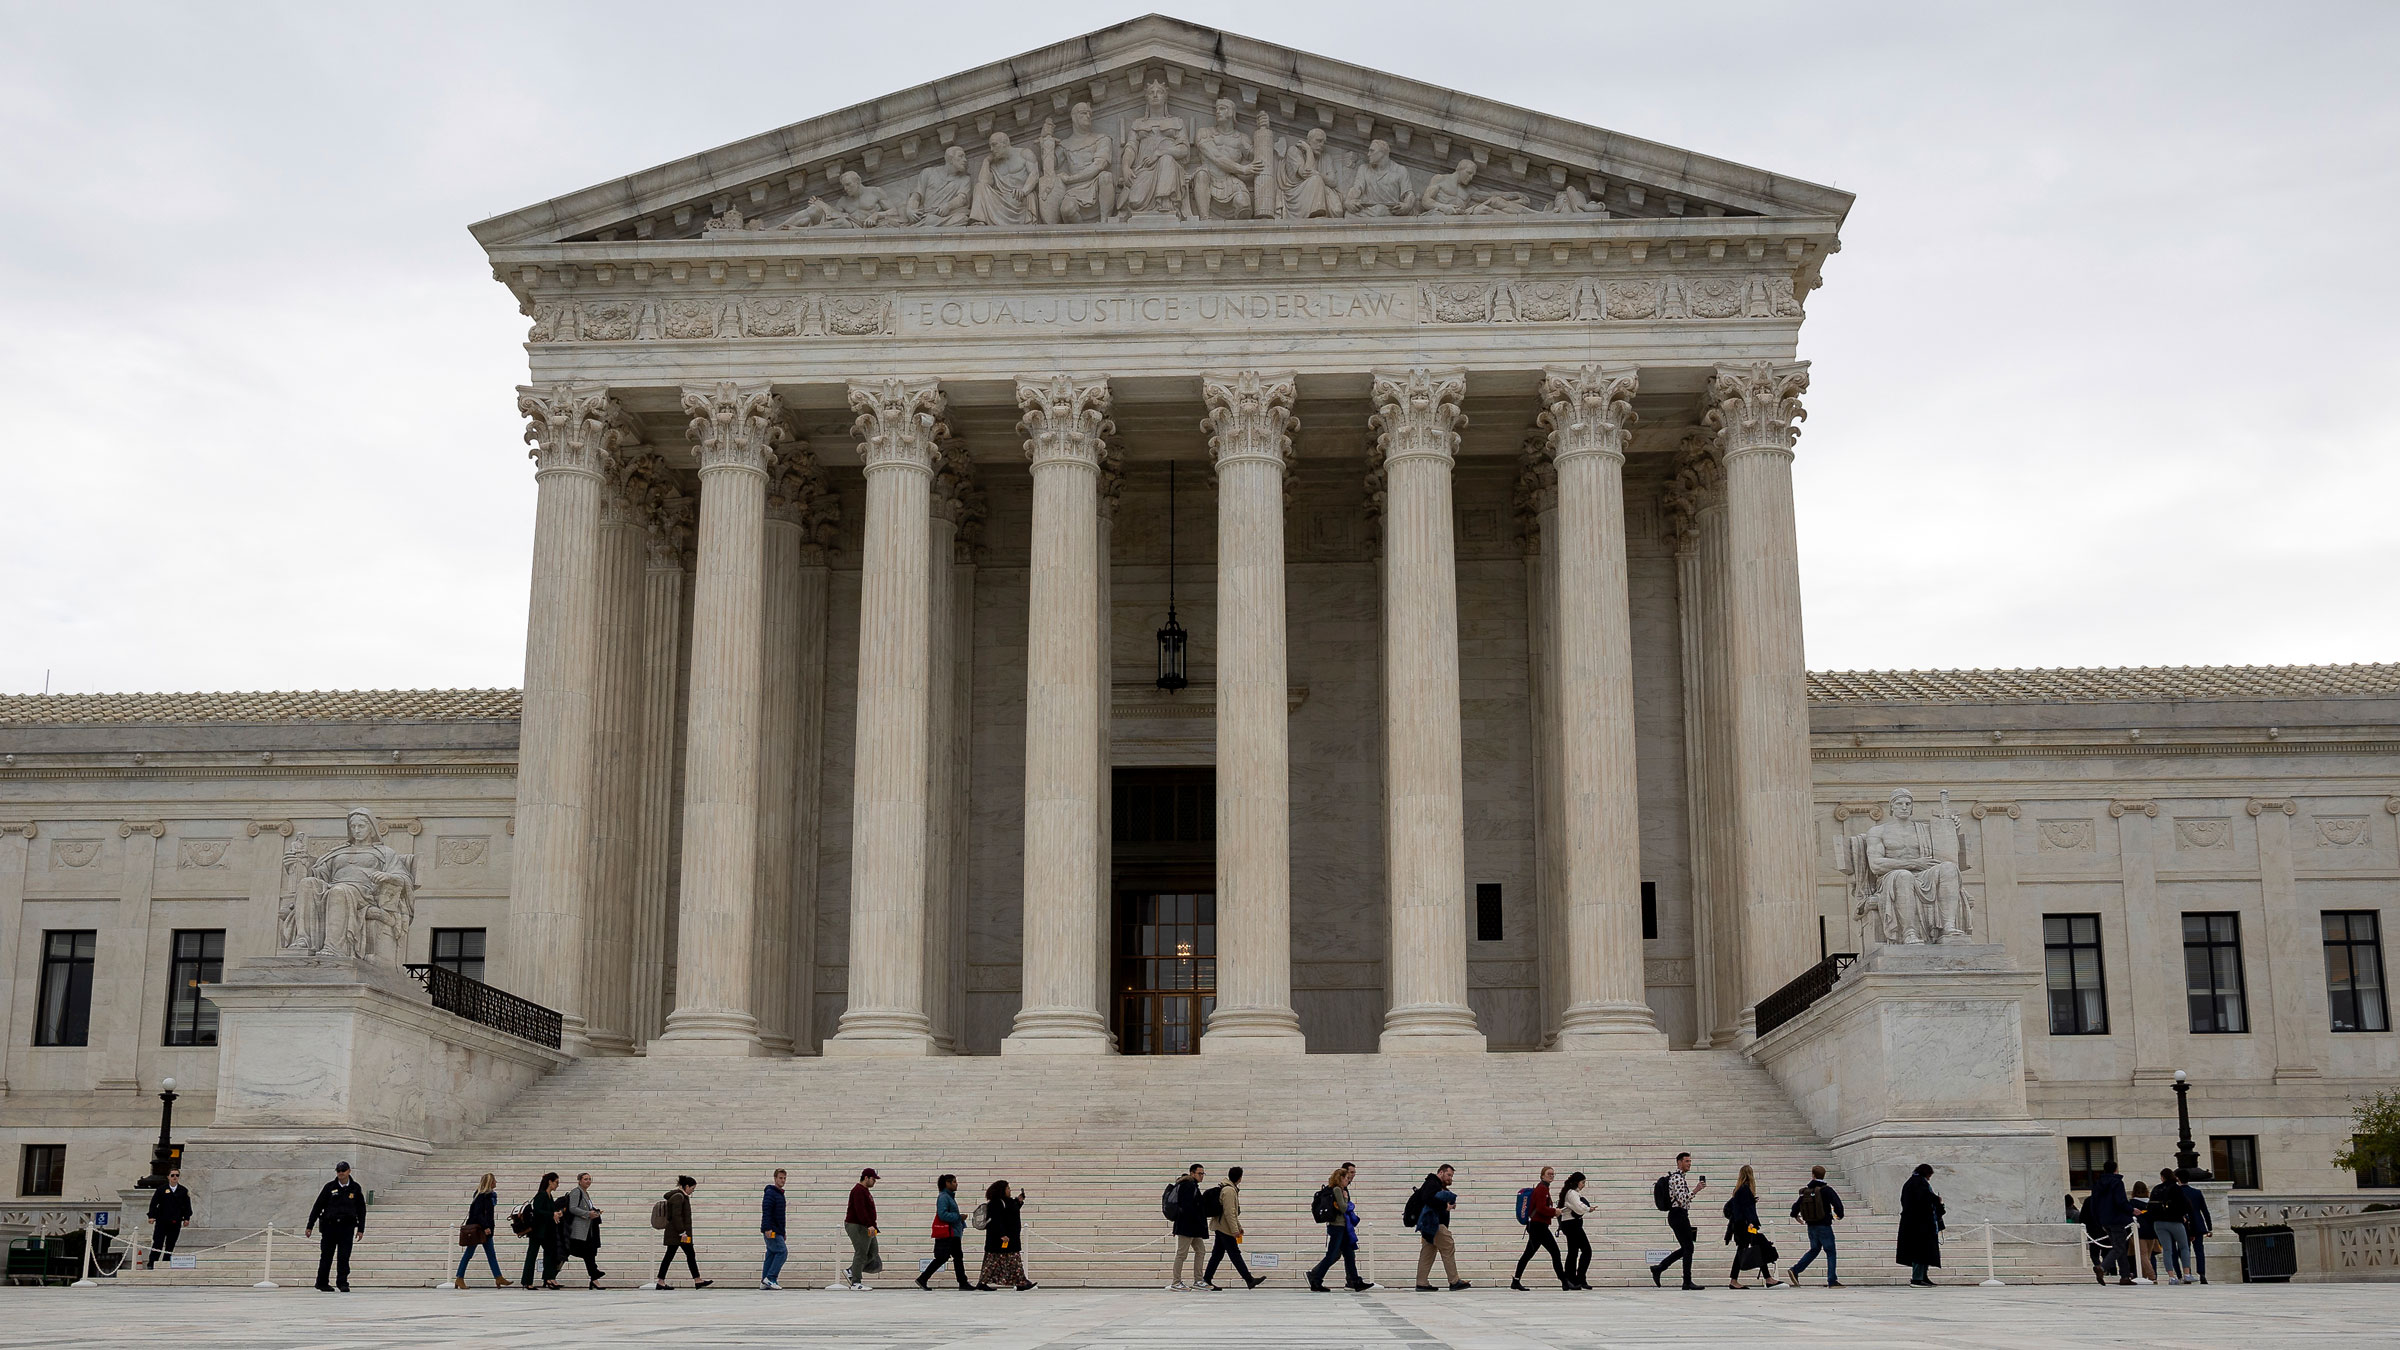 Members of the public enter the Supreme Court to attend oral arguments on Monday.